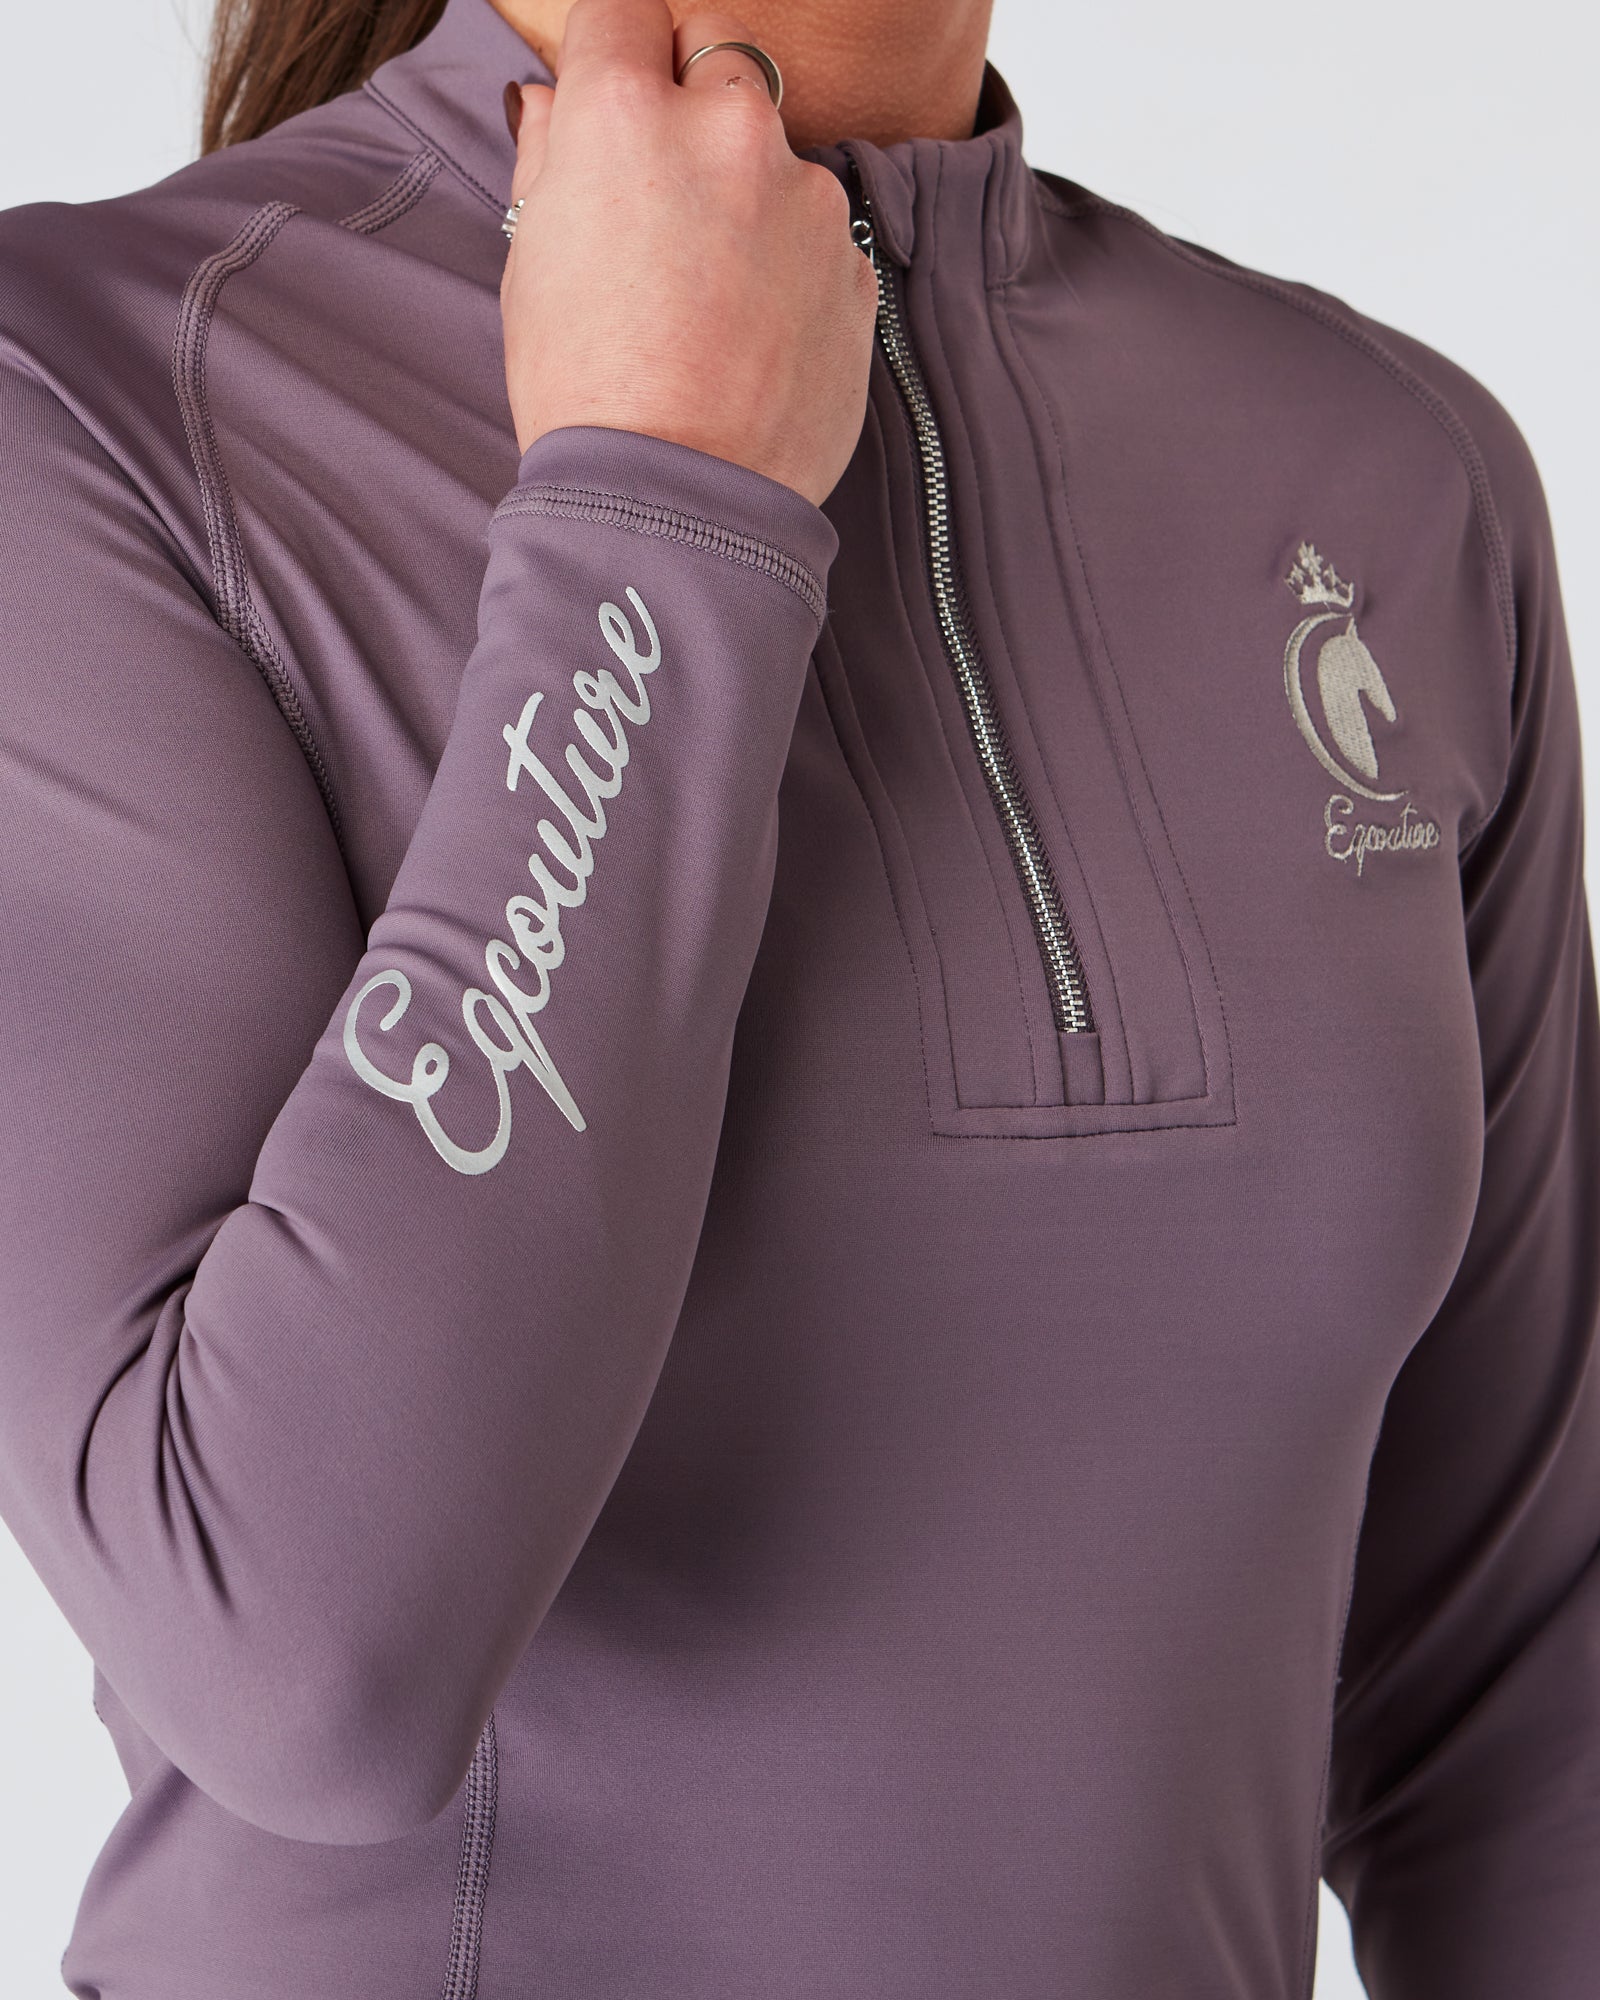 Equestrian mauve long sleeve riding top/ sports horse riding top- Eqcouture 